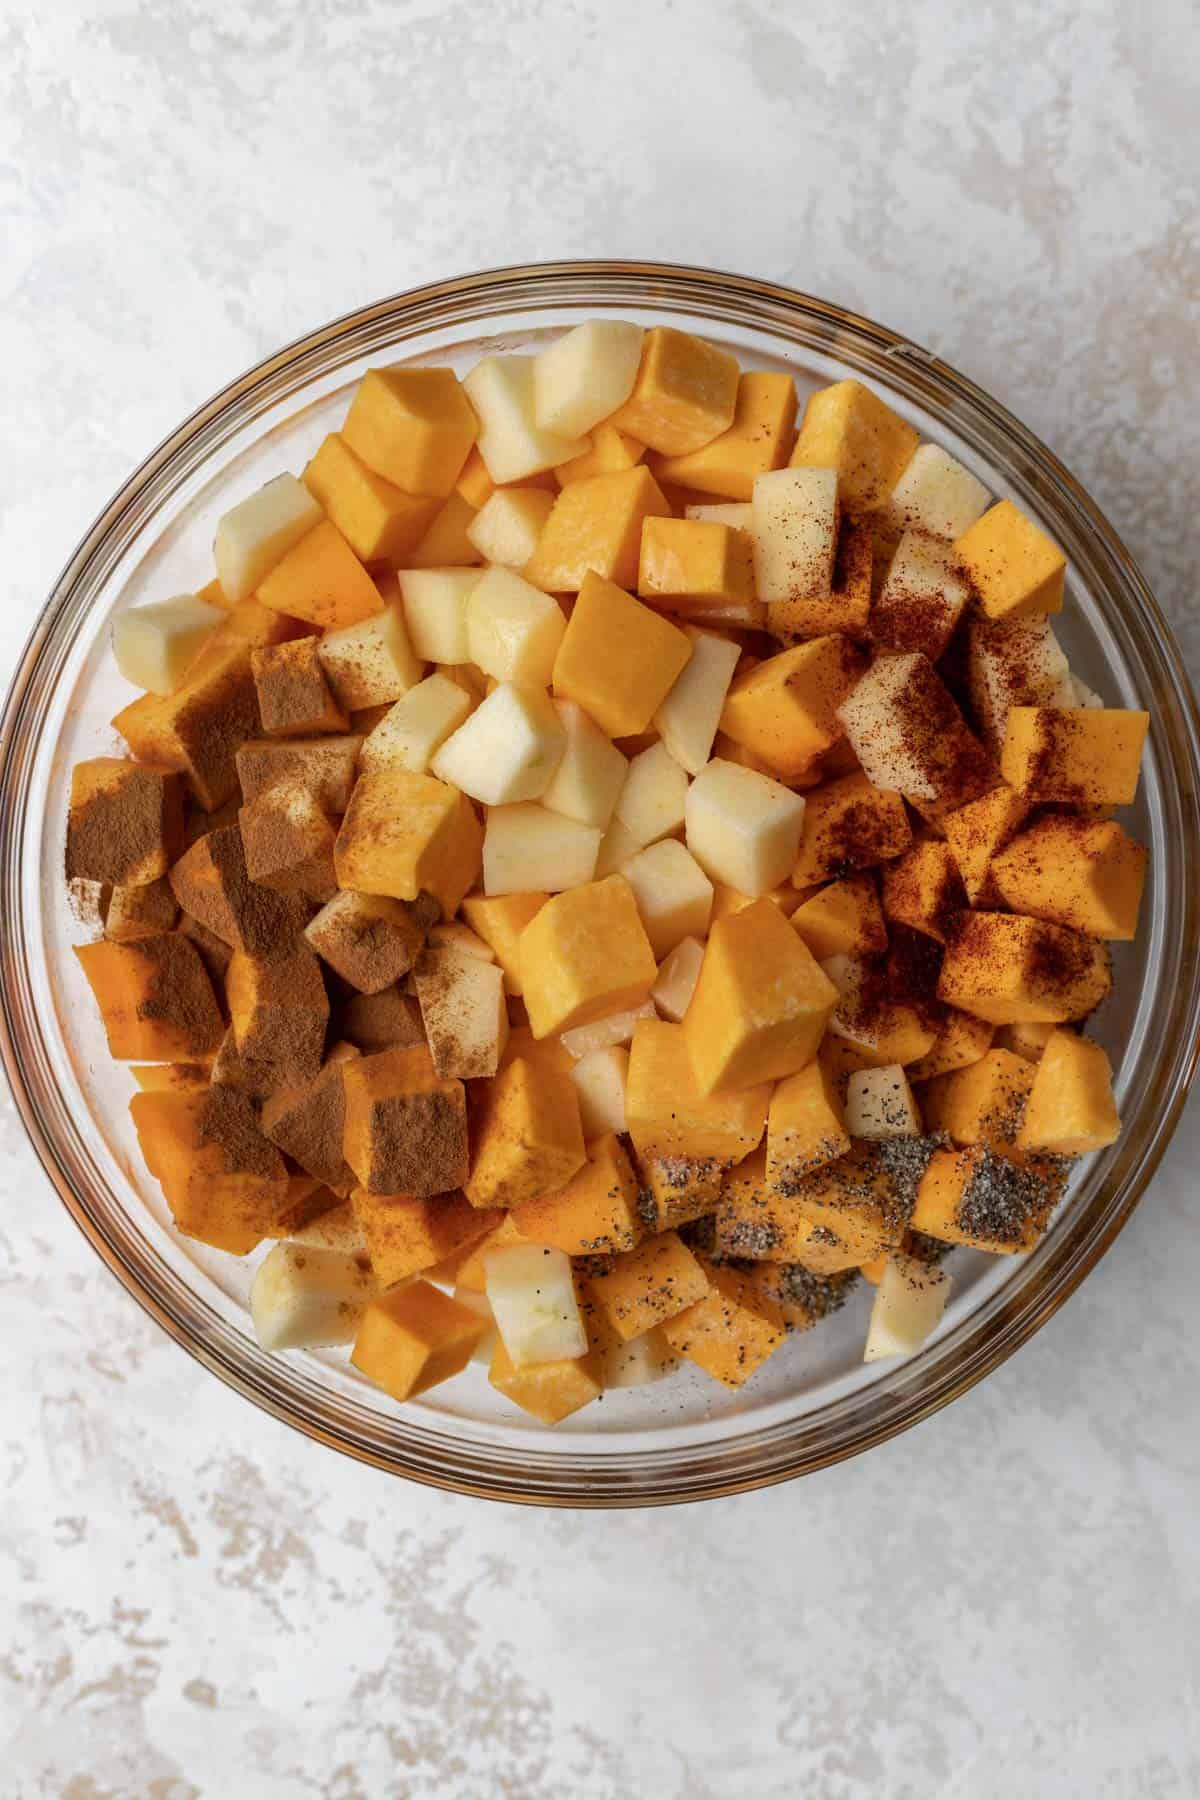 Diced and peeled butternut squash and apples in a glass mixing bowl with seasonings on top.